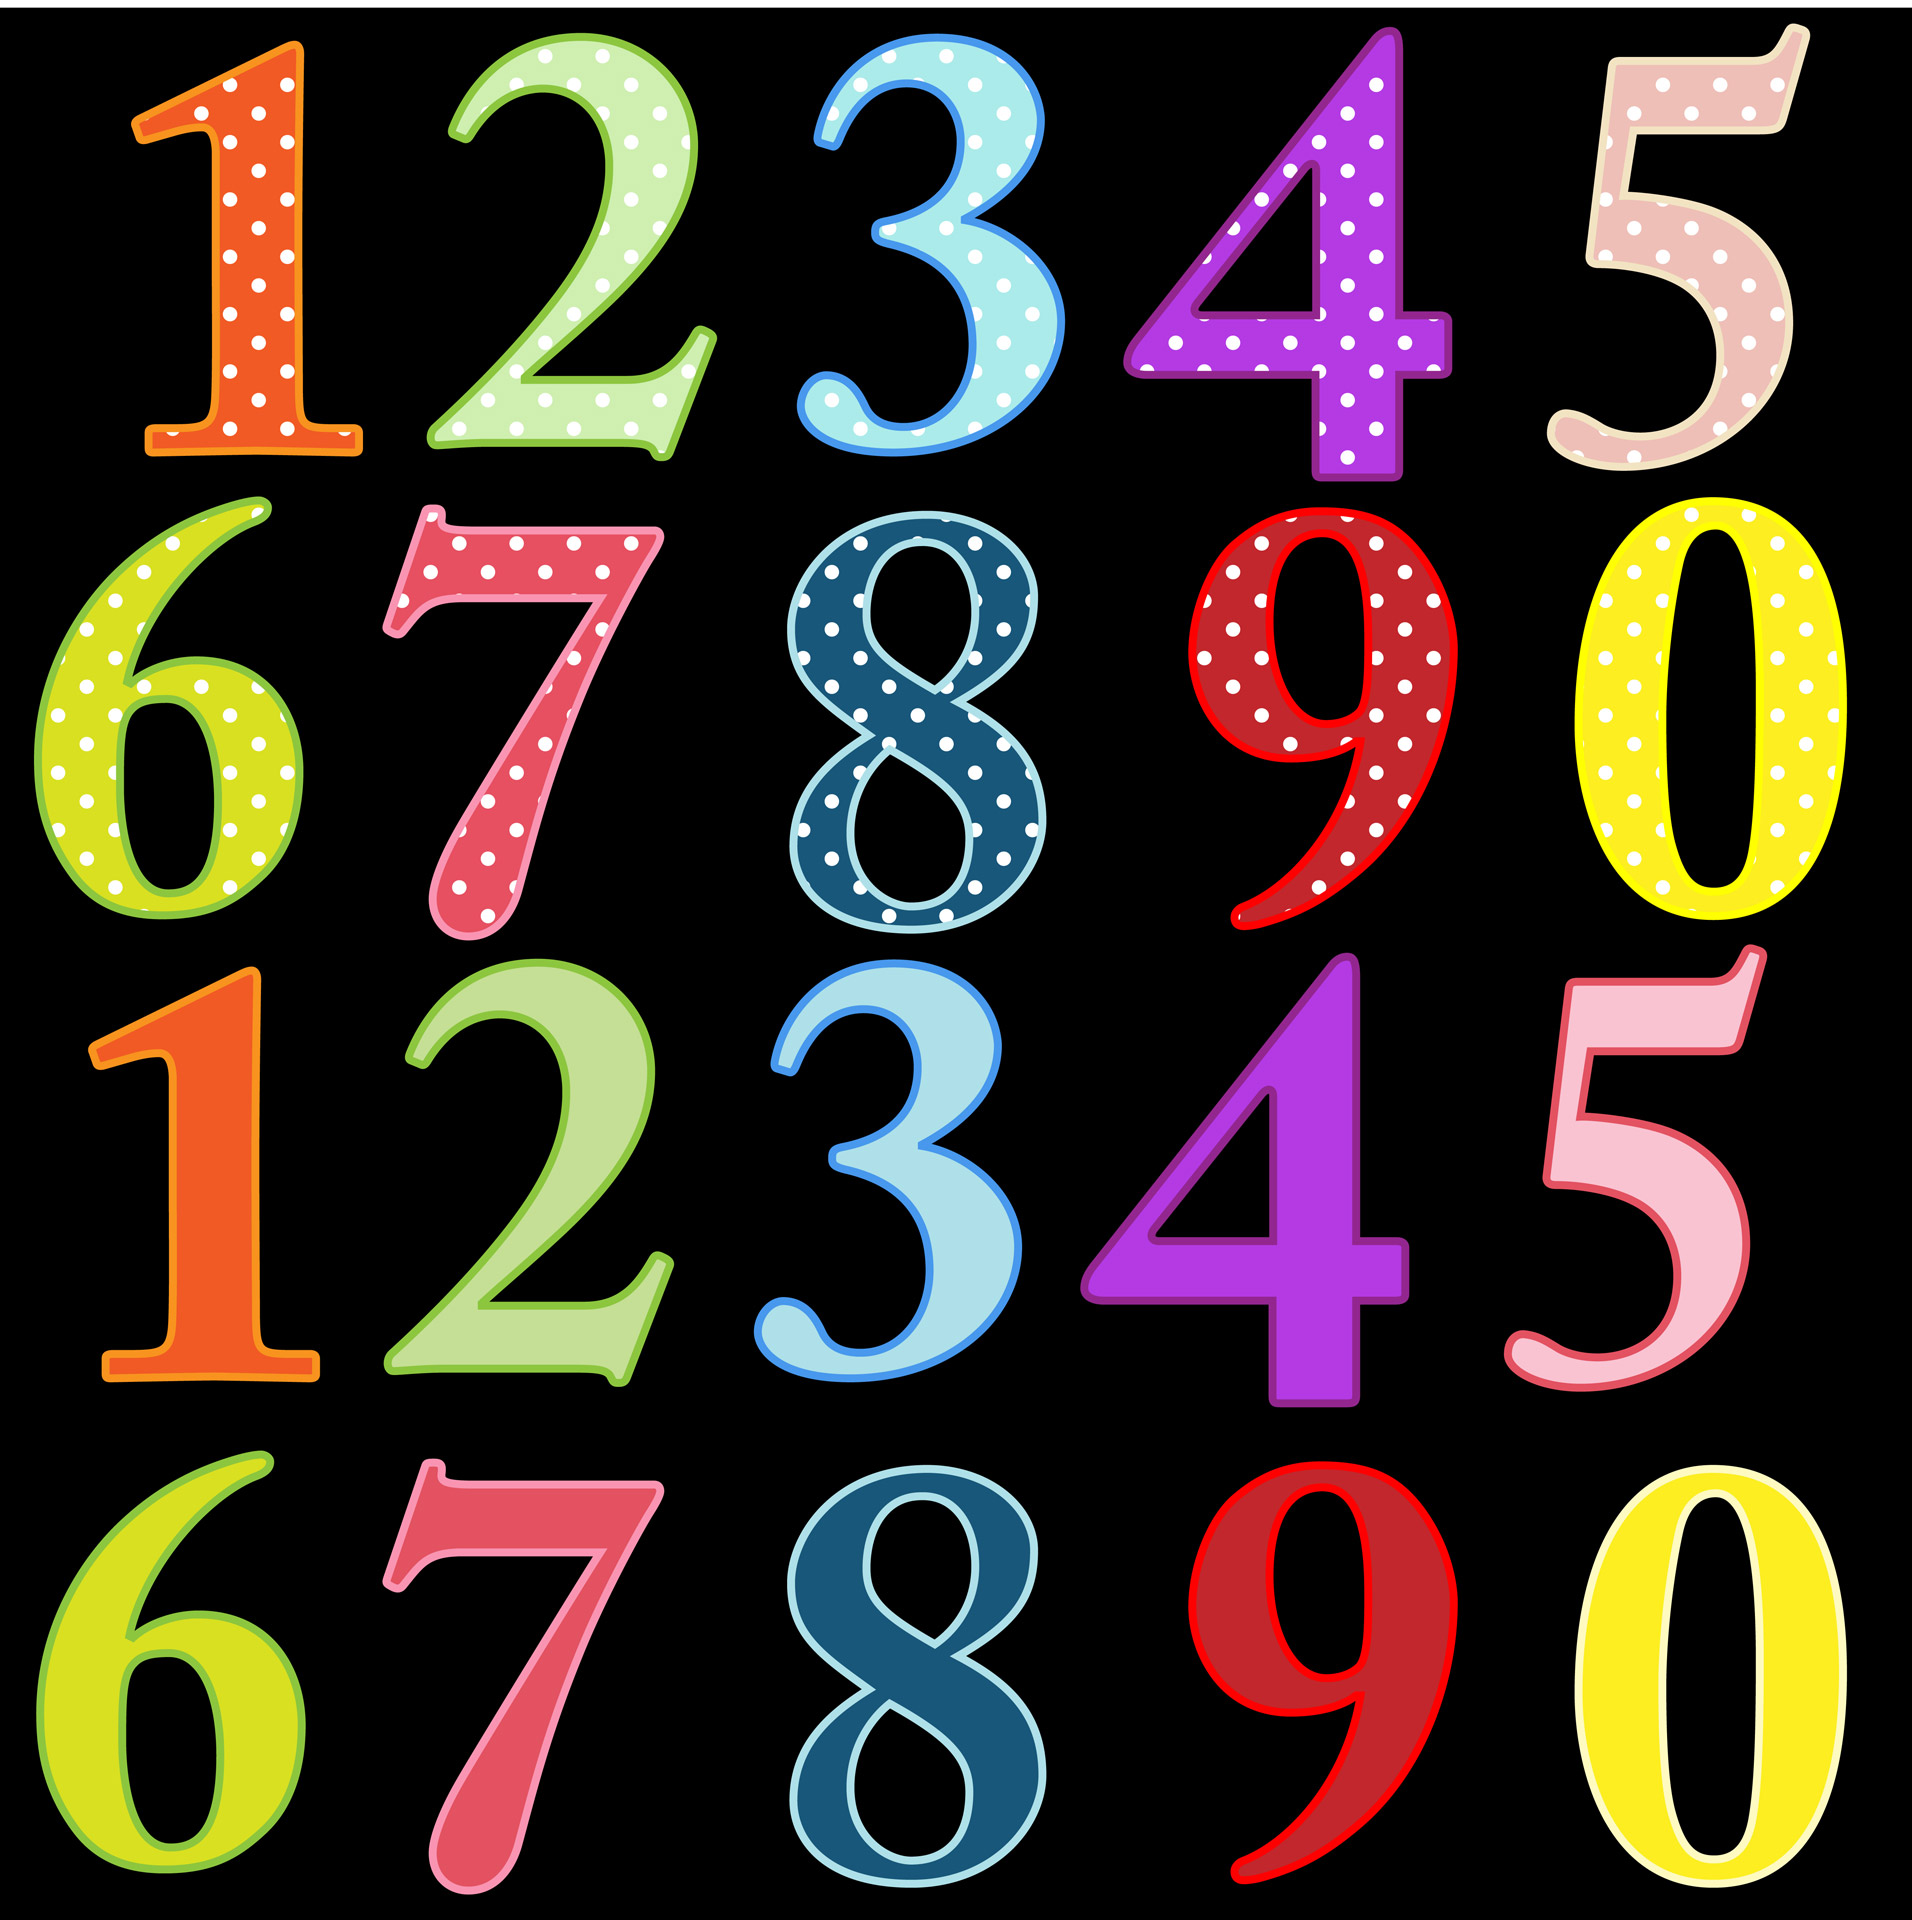 numbers-and-digits-free-stock-photo-public-domain-pictures